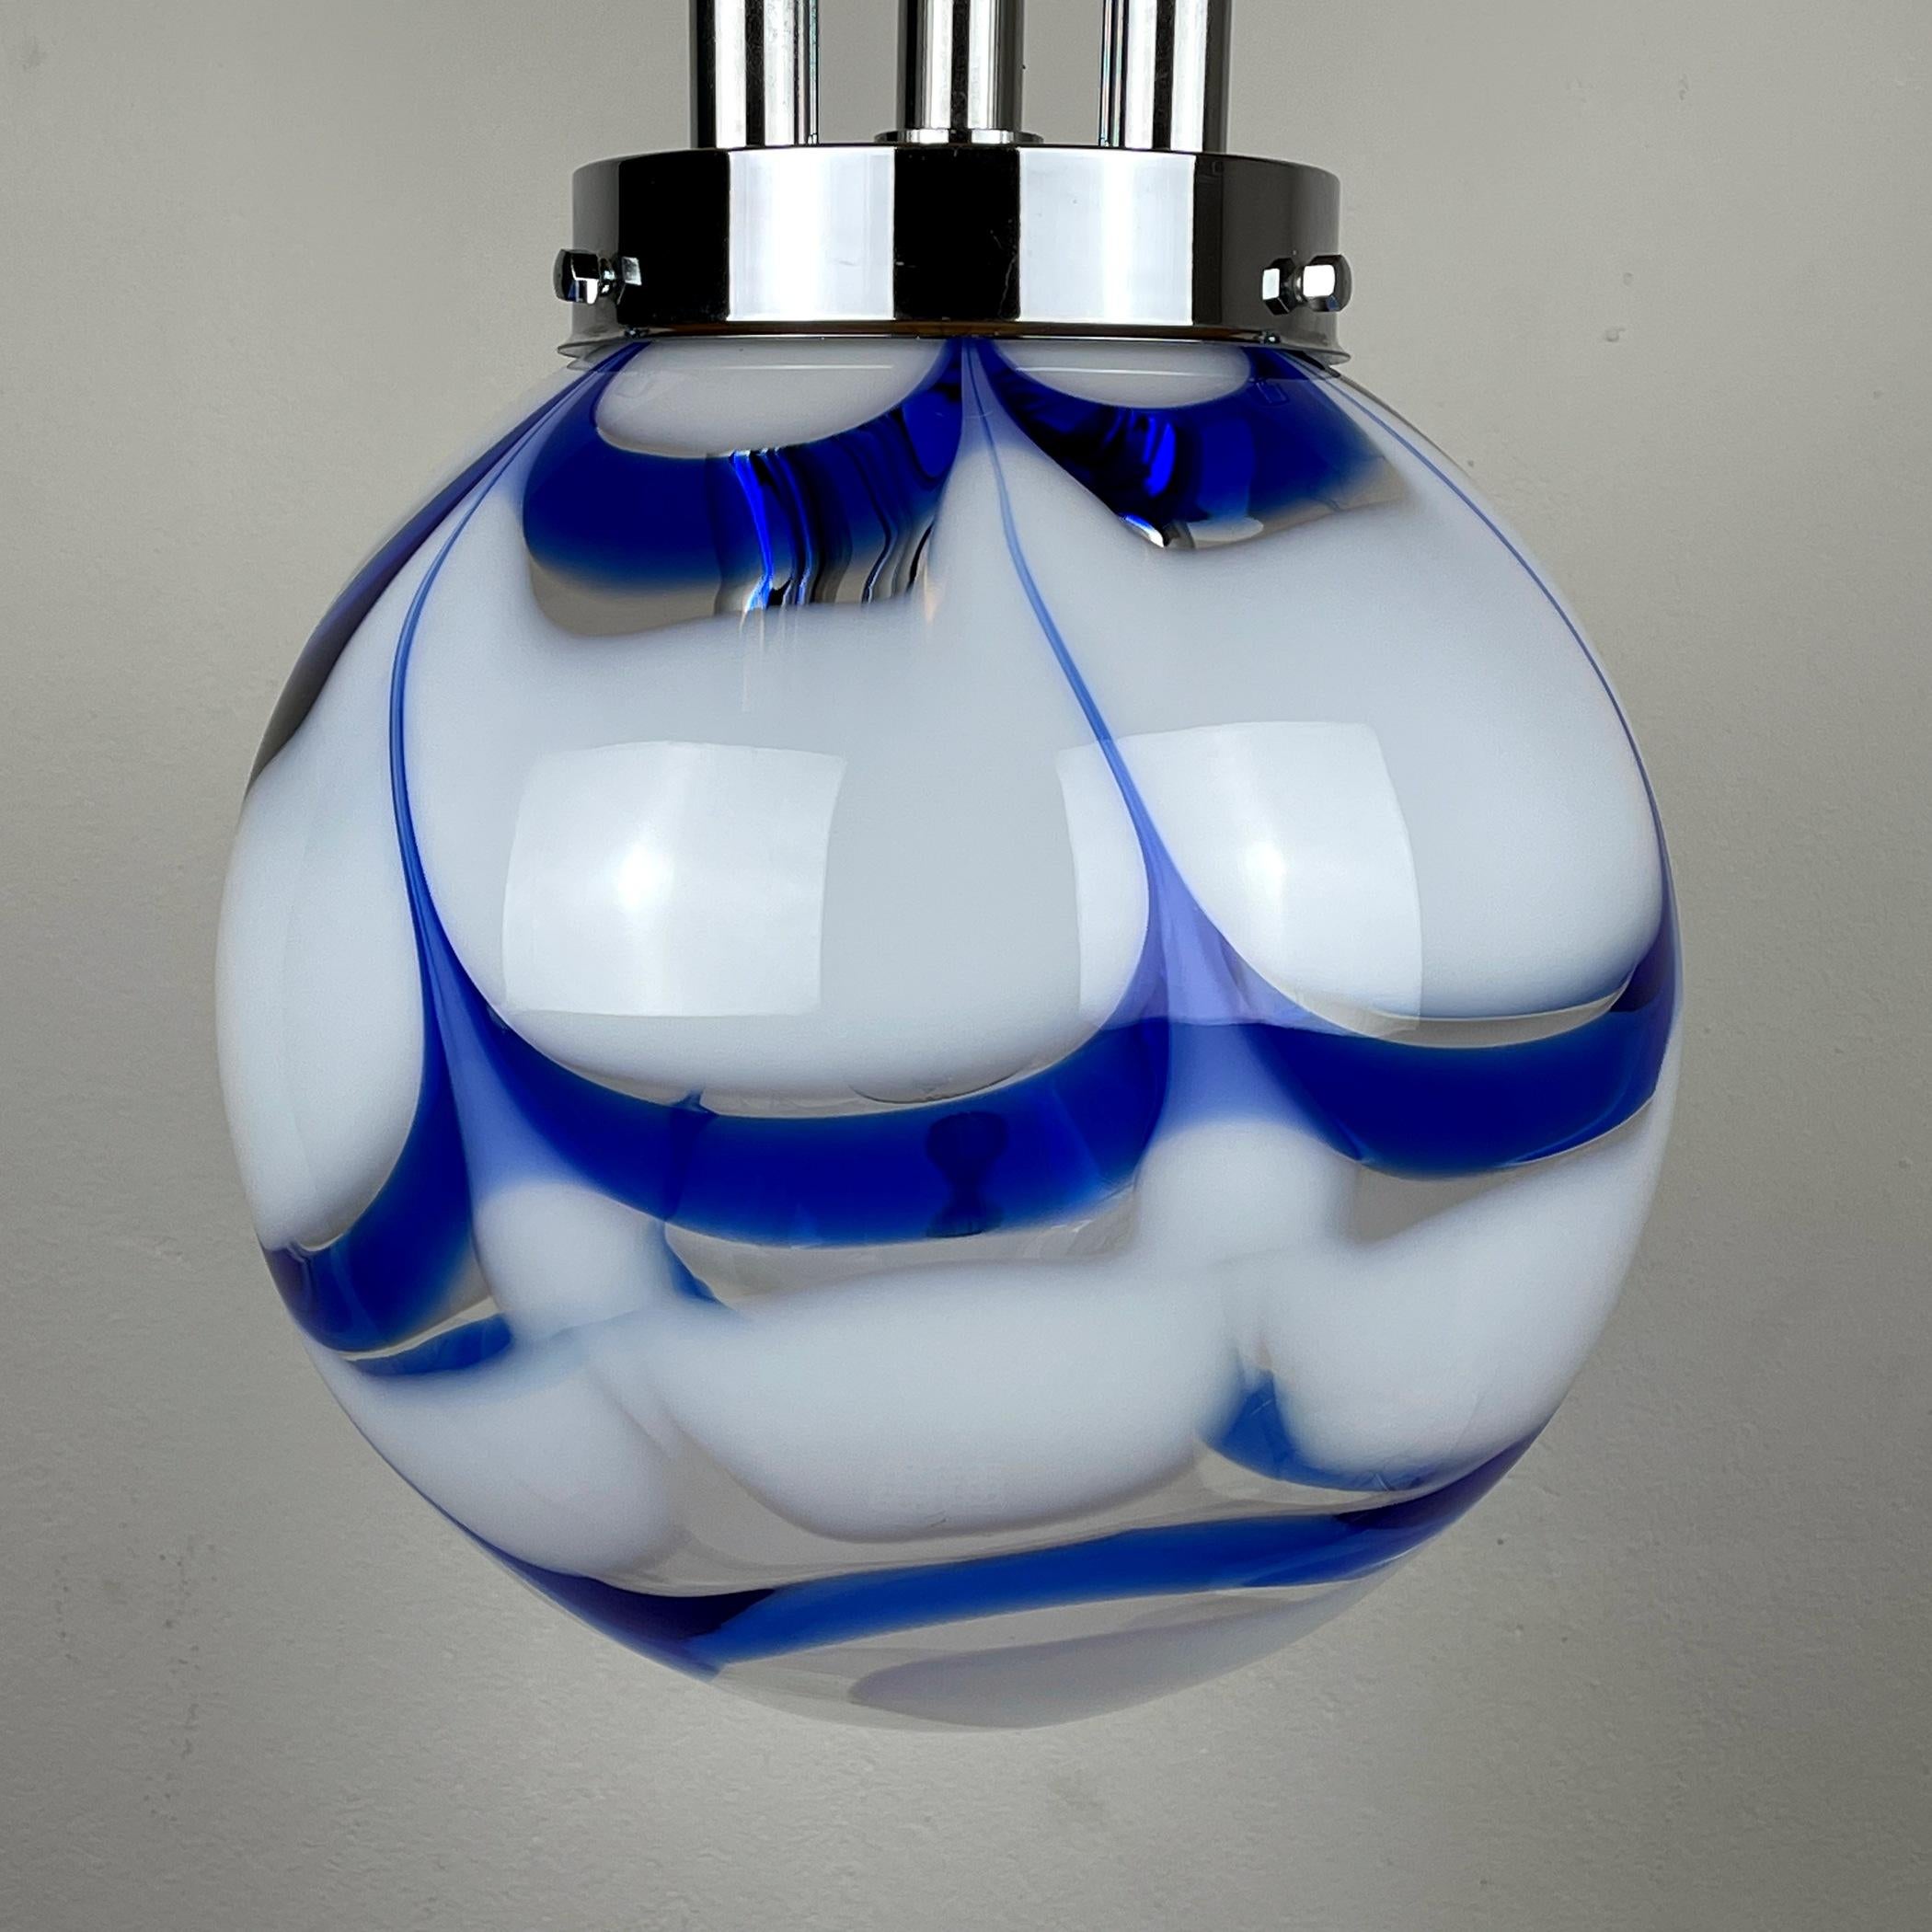 This large, beautiful vintage blue-white Murano lamp by Mazzega was made in Italy in the 70s. Perfect vintage condition. No chips or cracks. The metal has a patina. Requires 3 standard Edison E14 with a screw lamp and one E27. Mid-century swirl